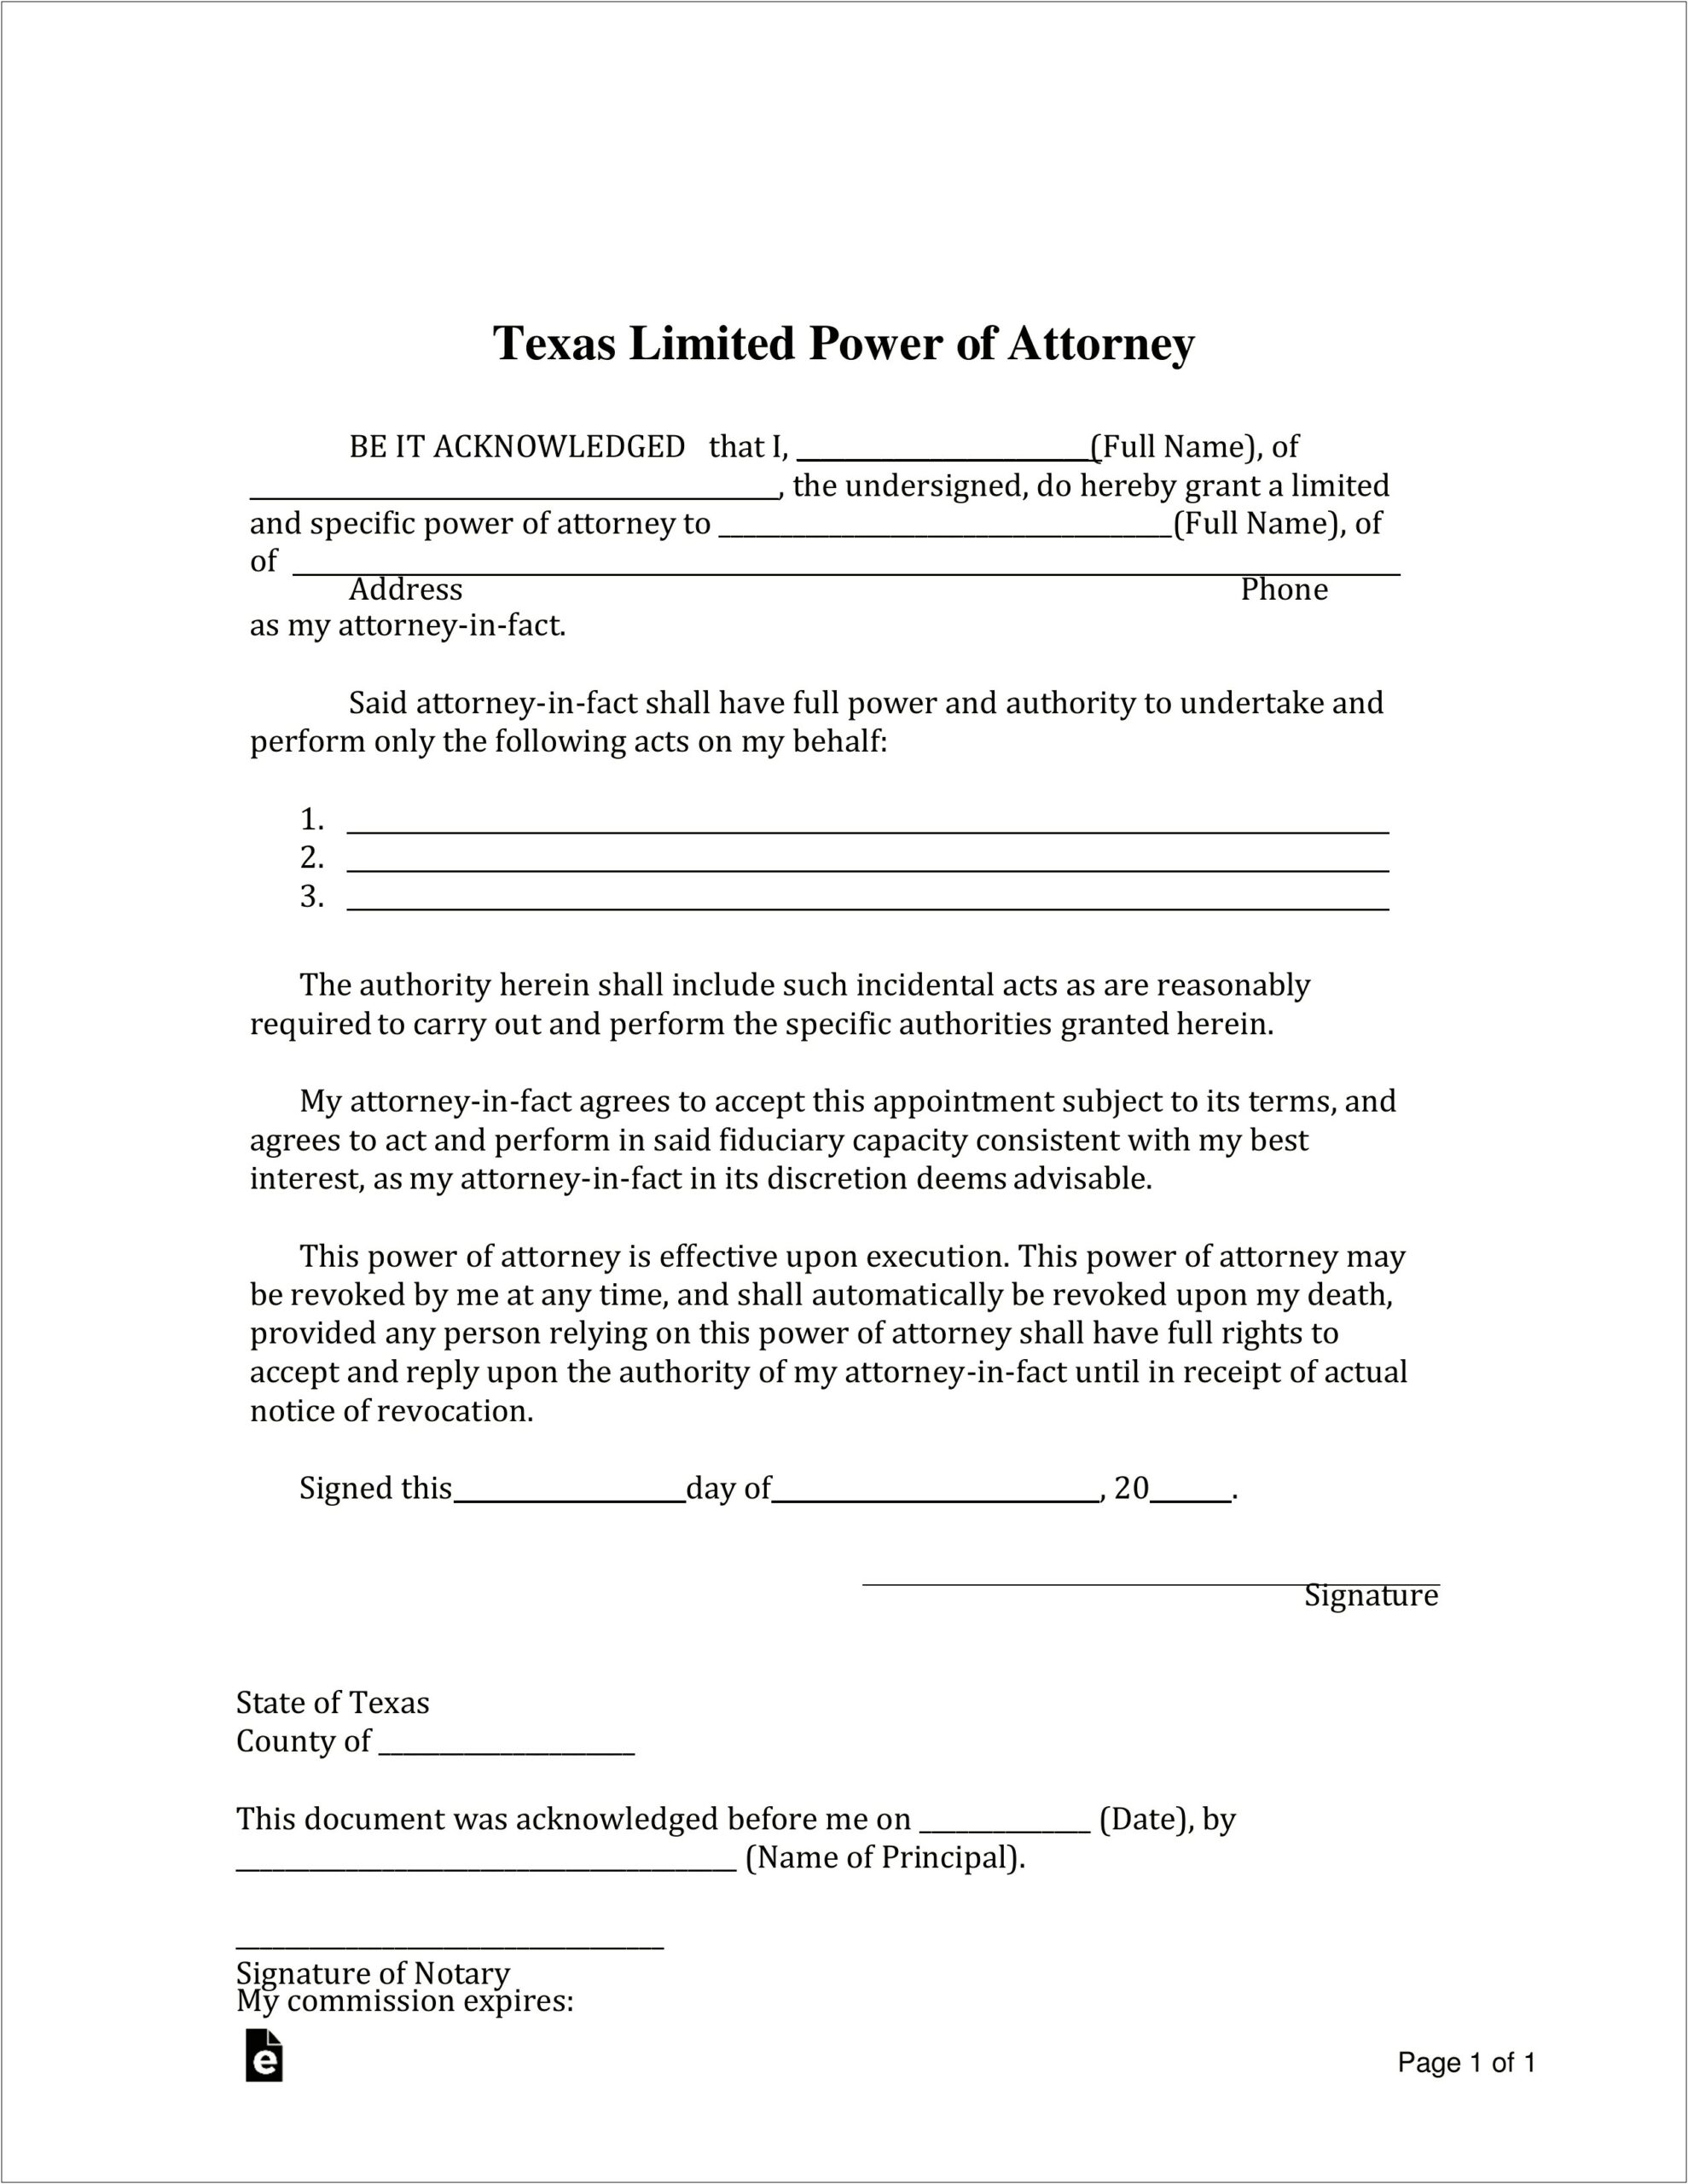 Limited Power Of Attorney Word Template For Texas